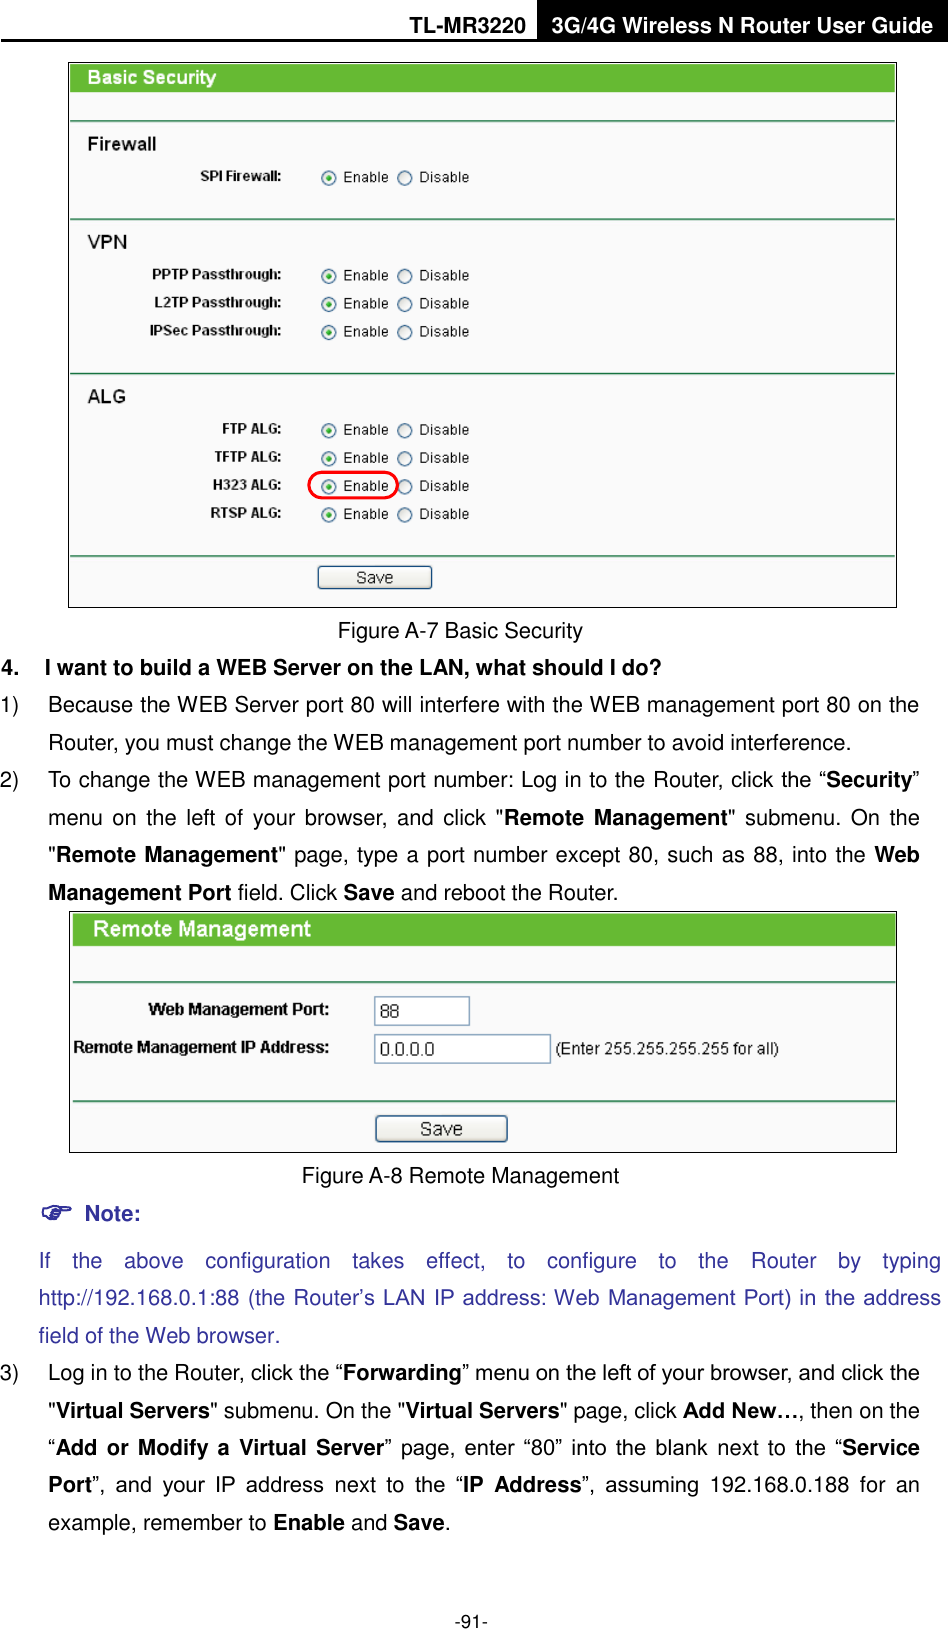 TL-MR3220 3G/4G Wireless N Router User Guide  -91-  Figure A-7 Basic Security 4.  I want to build a WEB Server on the LAN, what should I do? 1)  Because the WEB Server port 80 will interfere with the WEB management port 80 on the Router, you must change the WEB management port number to avoid interference. 2)  To change the WEB management port number: Log in to the Router, click the “Security” menu on the left of your browser, and click  &quot;Remote Management&quot; submenu.  On the &quot;Remote Management&quot; page, type a port number except 80, such as 88, into the Web Management Port field. Click Save and reboot the Router.  Figure A-8 Remote Management  Note: If  the  above  configuration  takes  effect,  to  configure  to  the  Router  by  typing http://192.168.0.1:88 (the Router’s LAN IP address: Web Management Port) in the address field of the Web browser. 3) Log in to the Router, click the “Forwarding” menu on the left of your browser, and click the &quot;Virtual Servers&quot; submenu. On the &quot;Virtual Servers&quot; page, click Add New…, then on the “Add or Modify  a Virtual Server”  page,  enter  “80”  into  the  blank  next to  the  “Service Port”,  and  your  IP  address  next  to  the  “IP  Address”,  assuming  192.168.0.188  for  an example, remember to Enable and Save. 